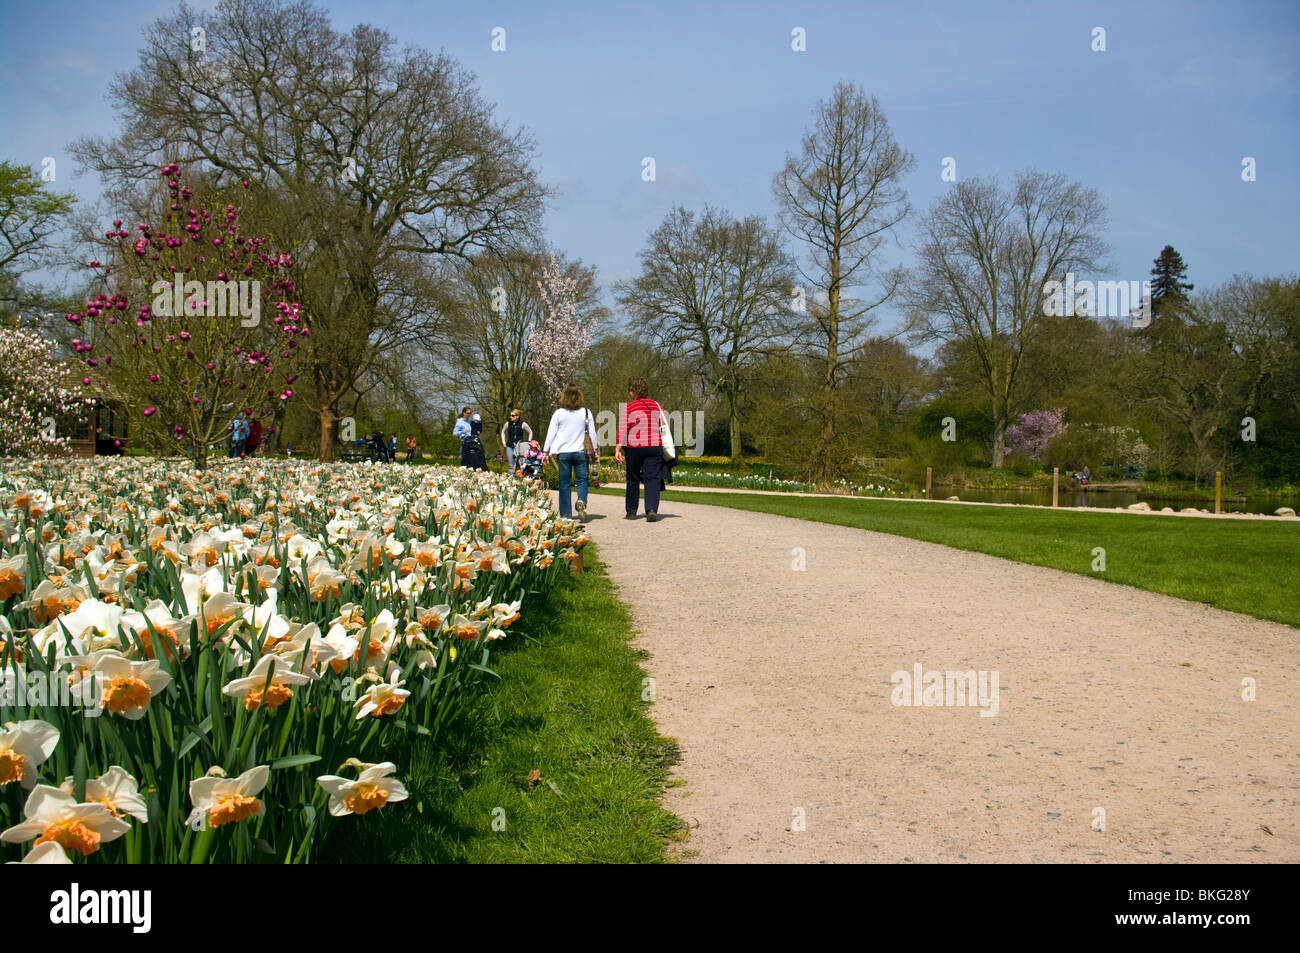 People Walking Beside A Bed Of Daffodils RHS Wisley Gardens Surrey England Stock Photo